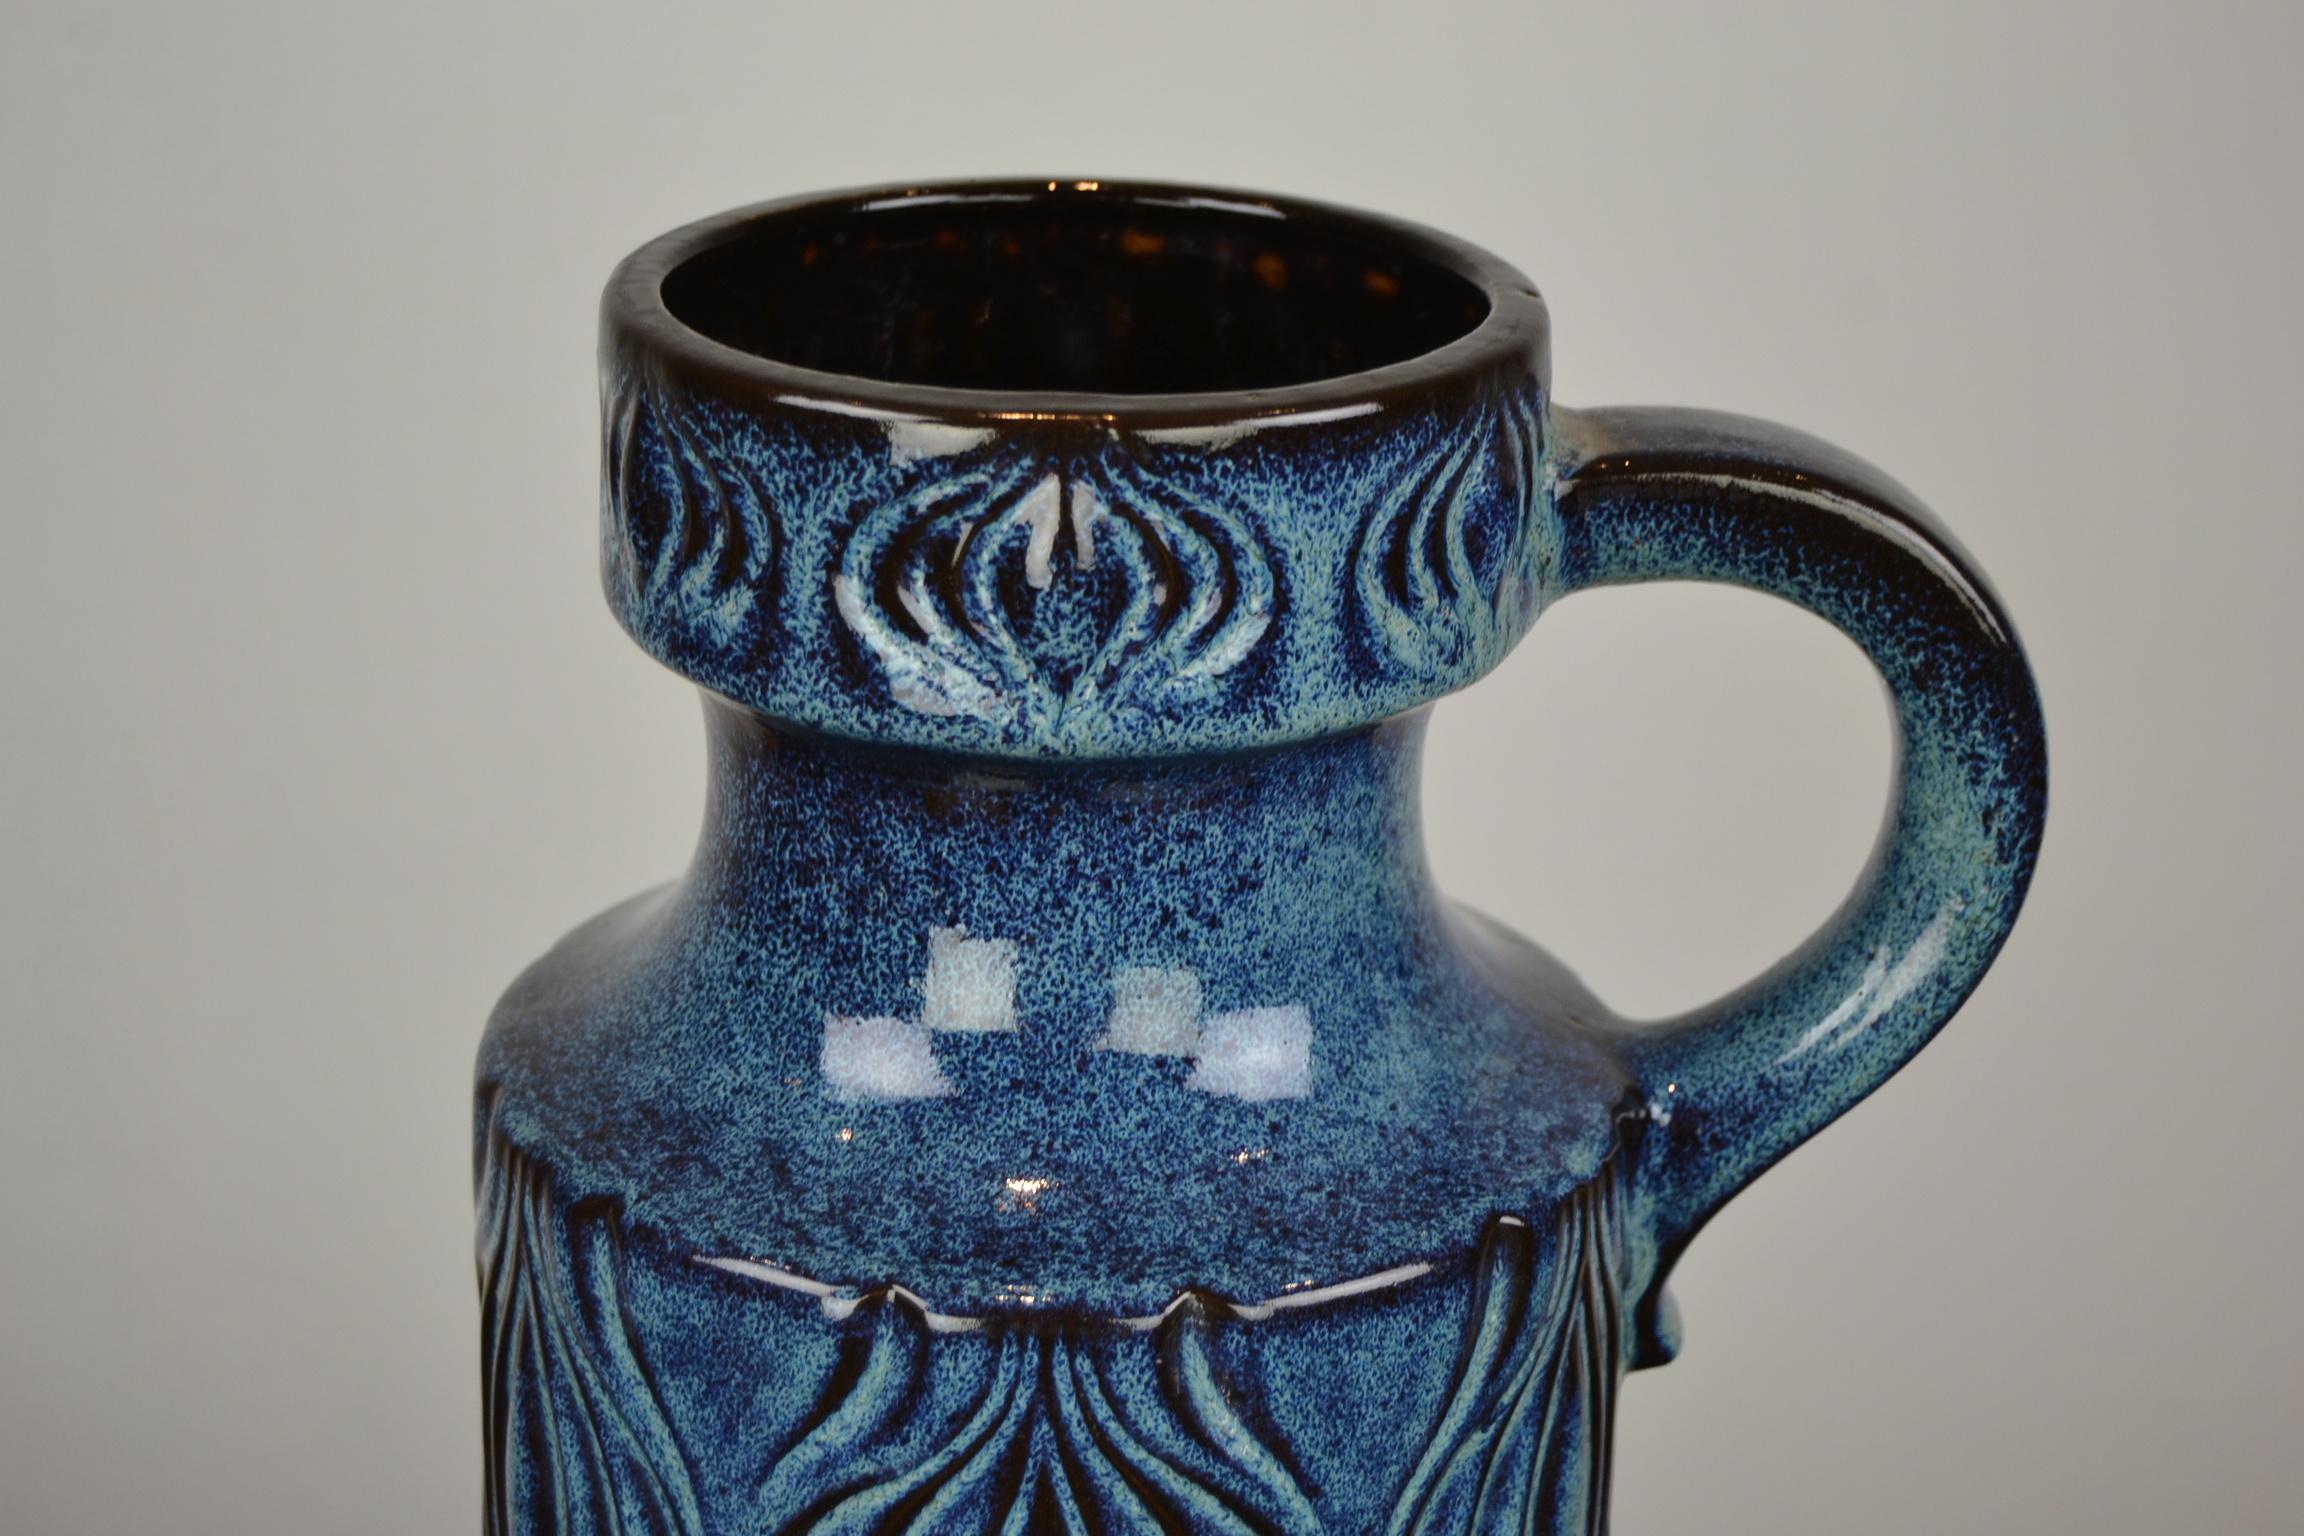 Blue floor vase with handle by Scheurich, Western Germany.
This 1960s blue ceramic vase is marked under 485-45, Western Germany. 

This vase has a beautiful blue color and minimalistic design on the vase.
It fits also our blue chair very well